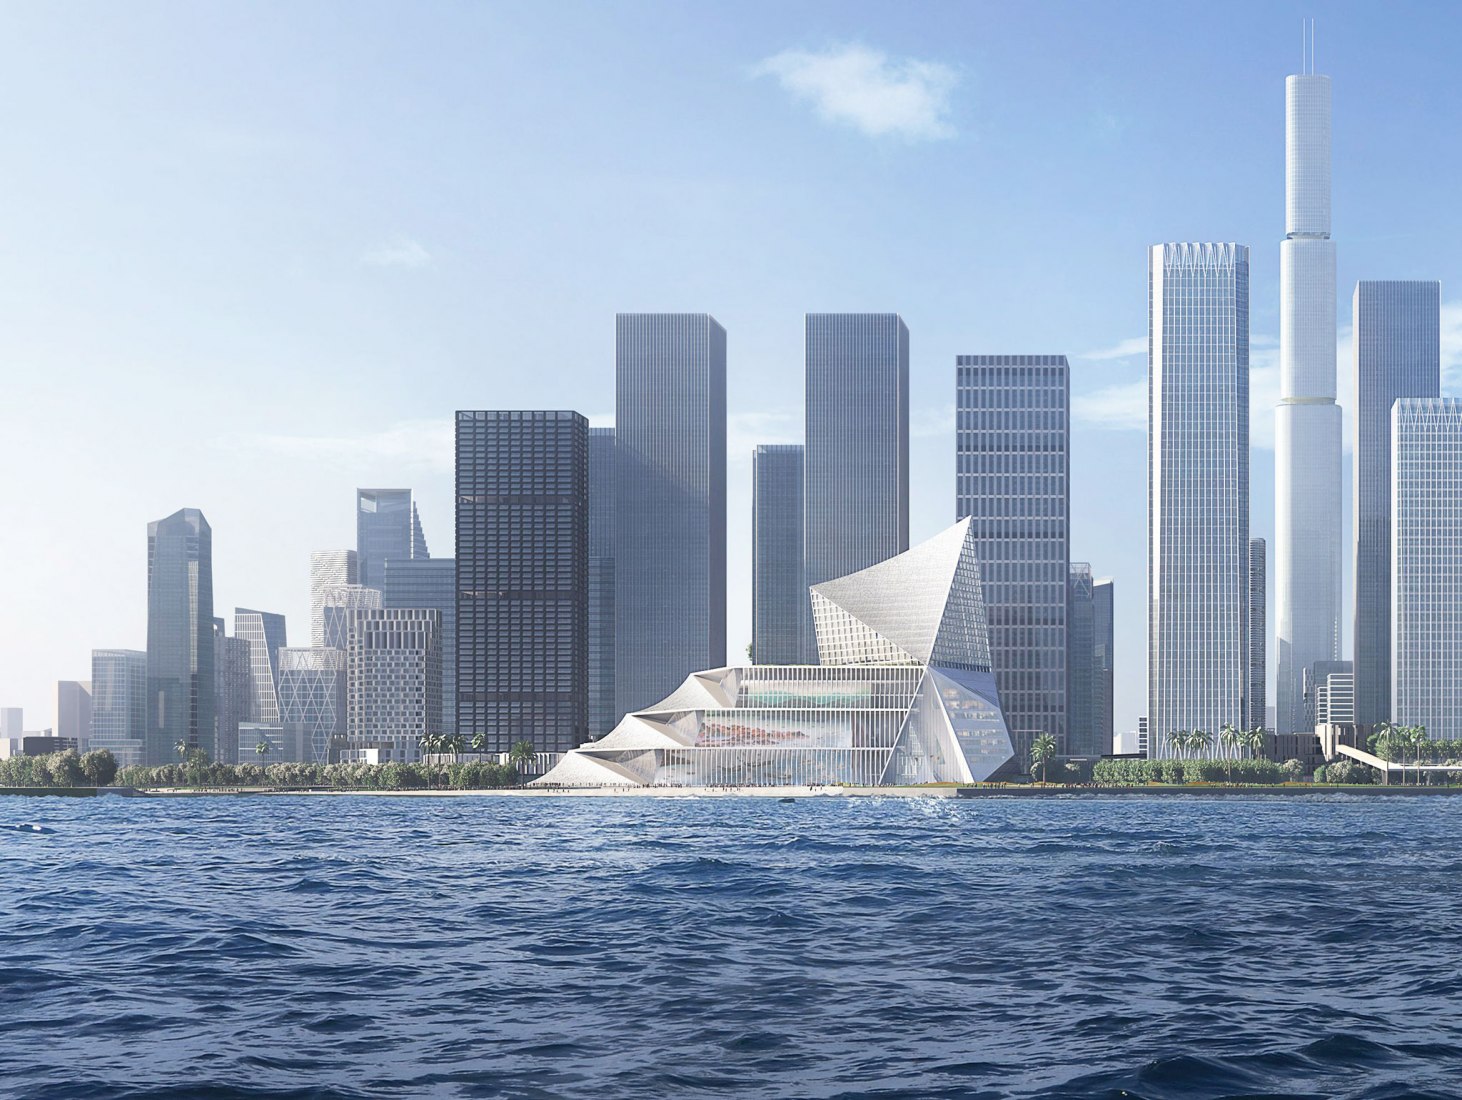 Qianhai International Financial Exchange Center in Shenzhen by OMA. Image courtesy of OMA